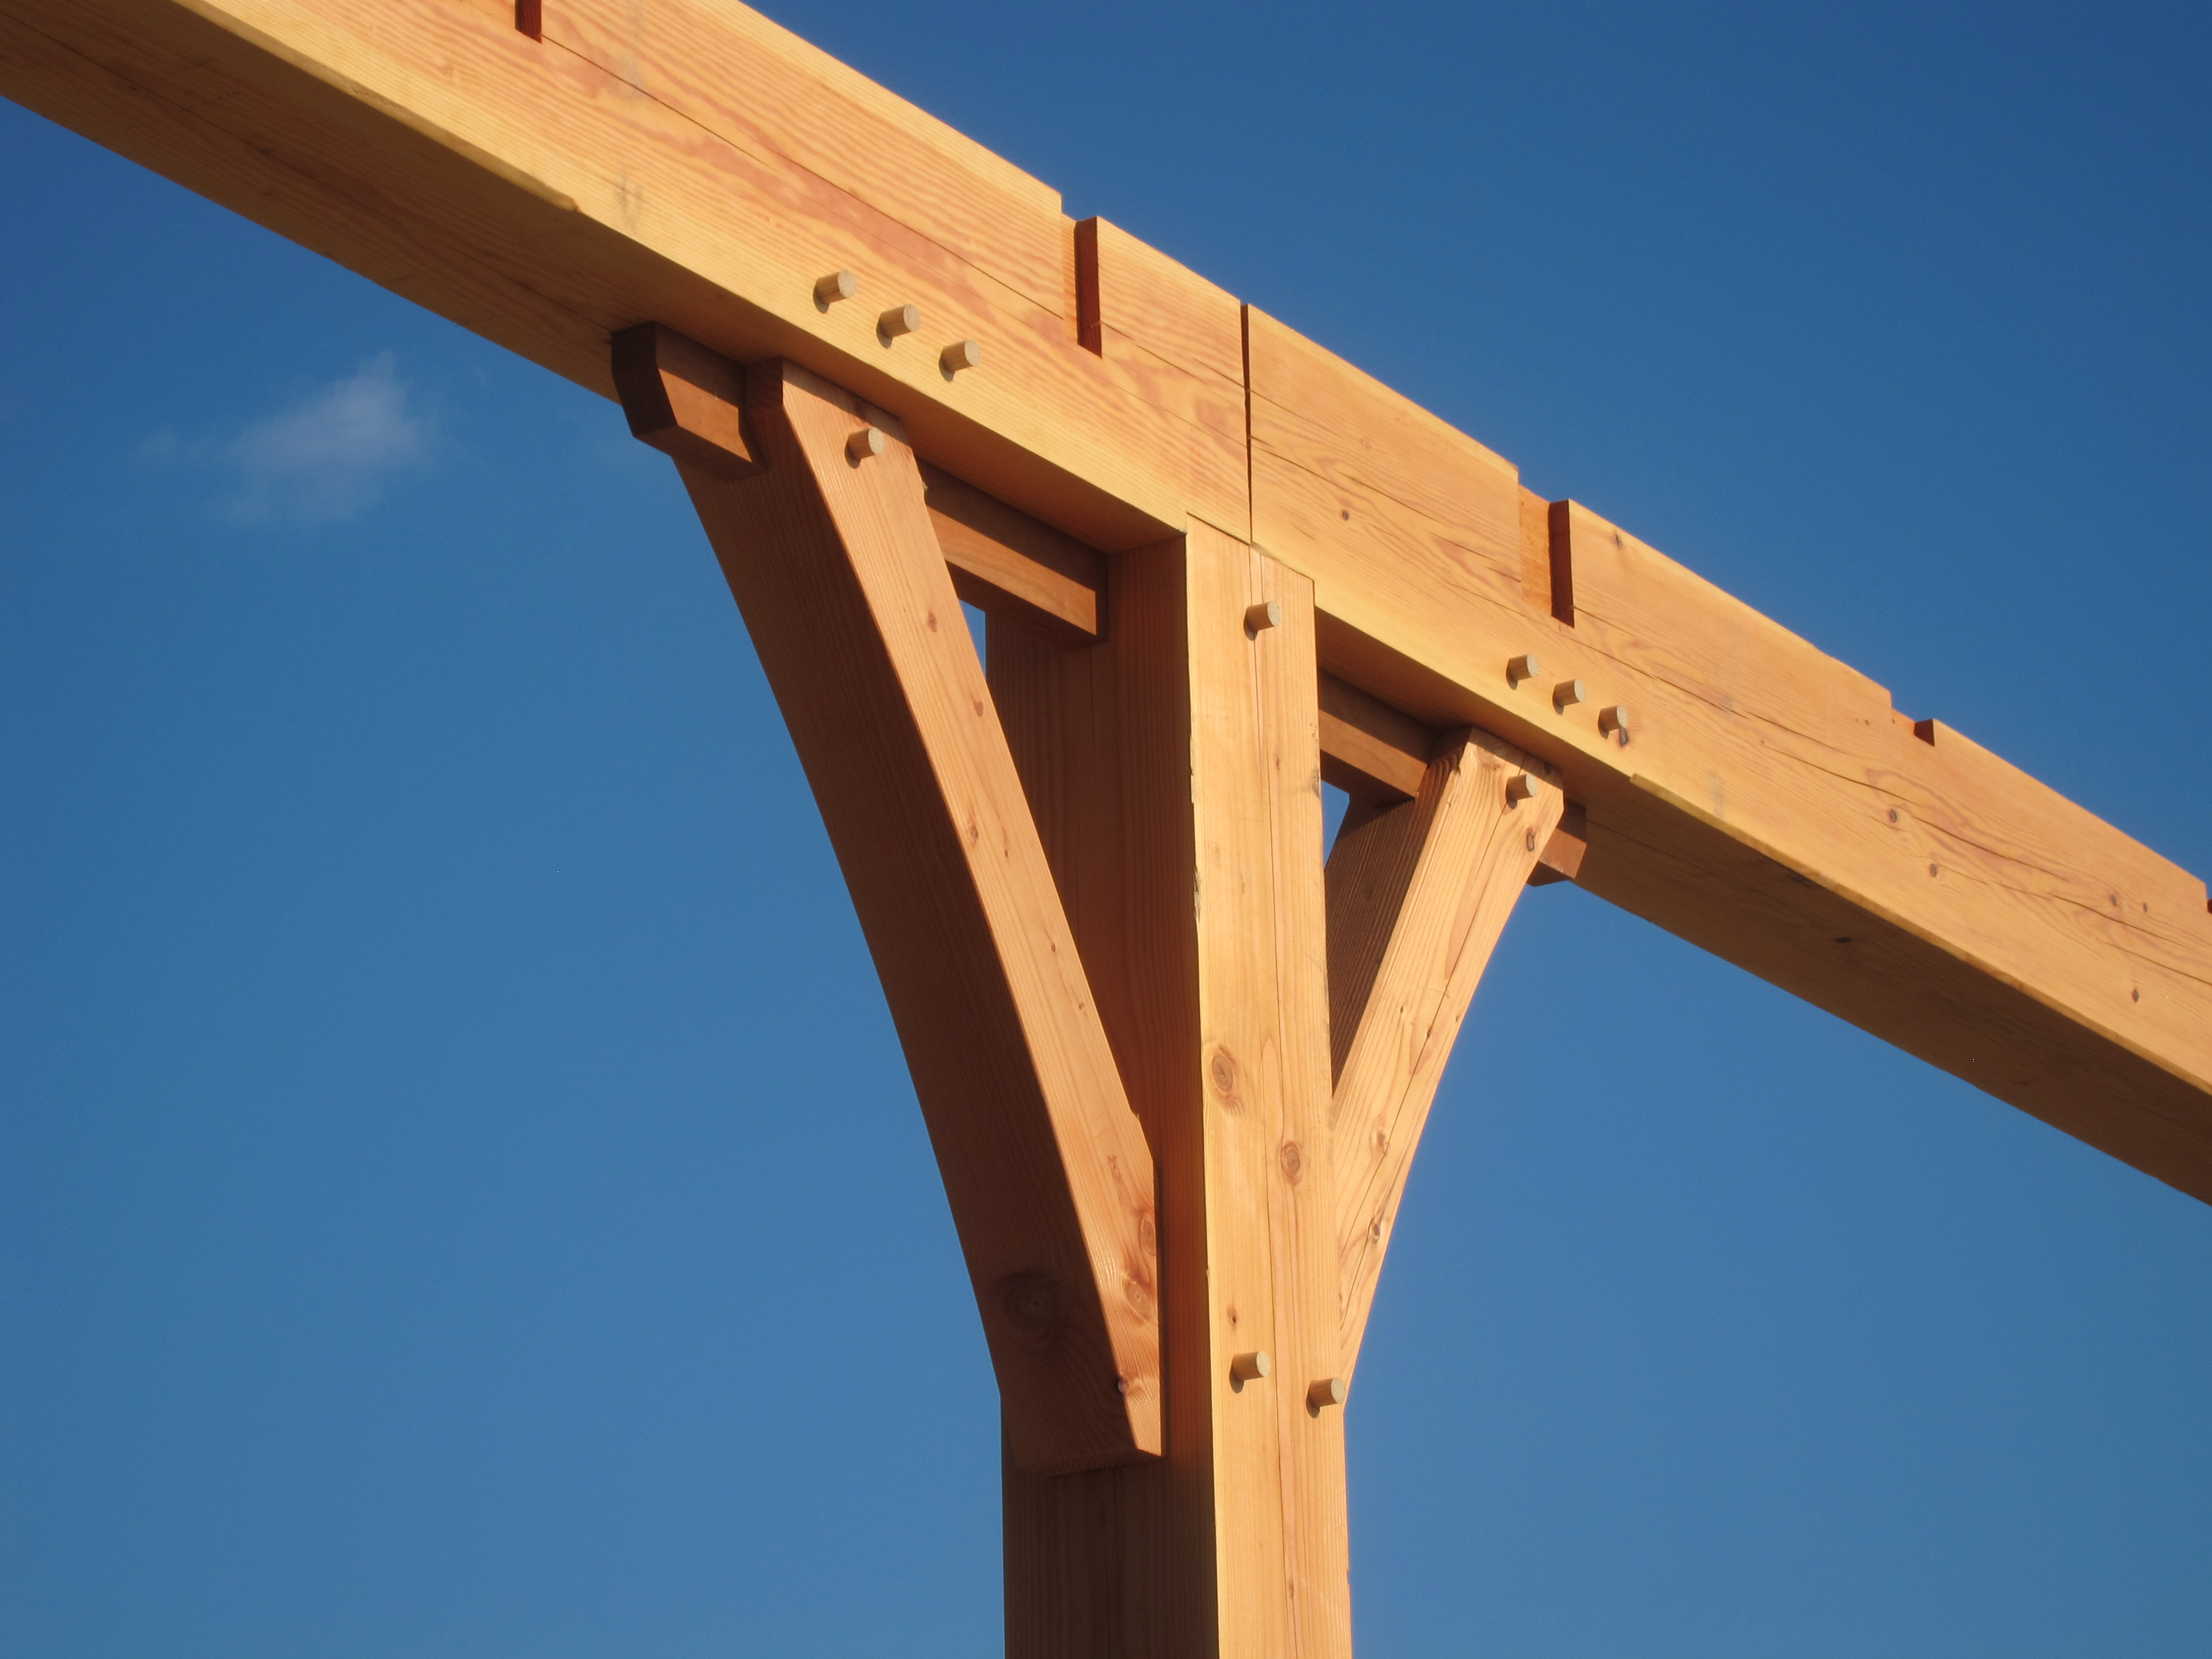 Traditional Timber Frame Joints